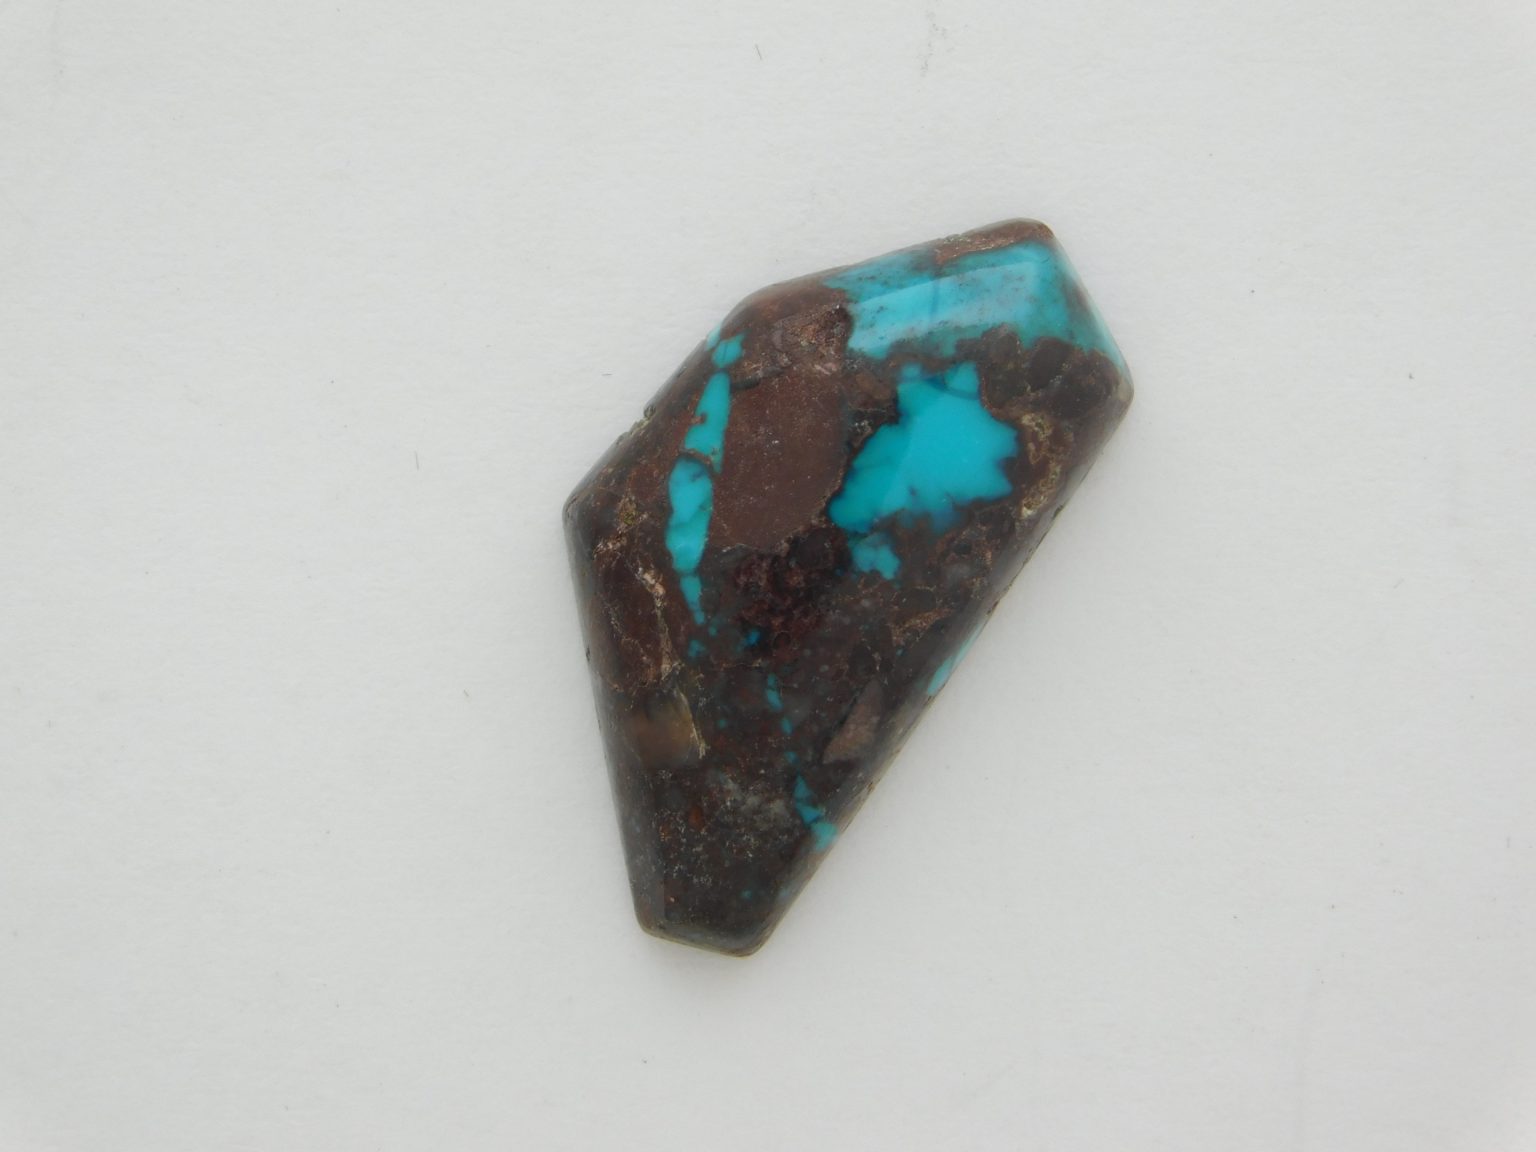 Bisbee Turquoise Cabochon 11.5 carats